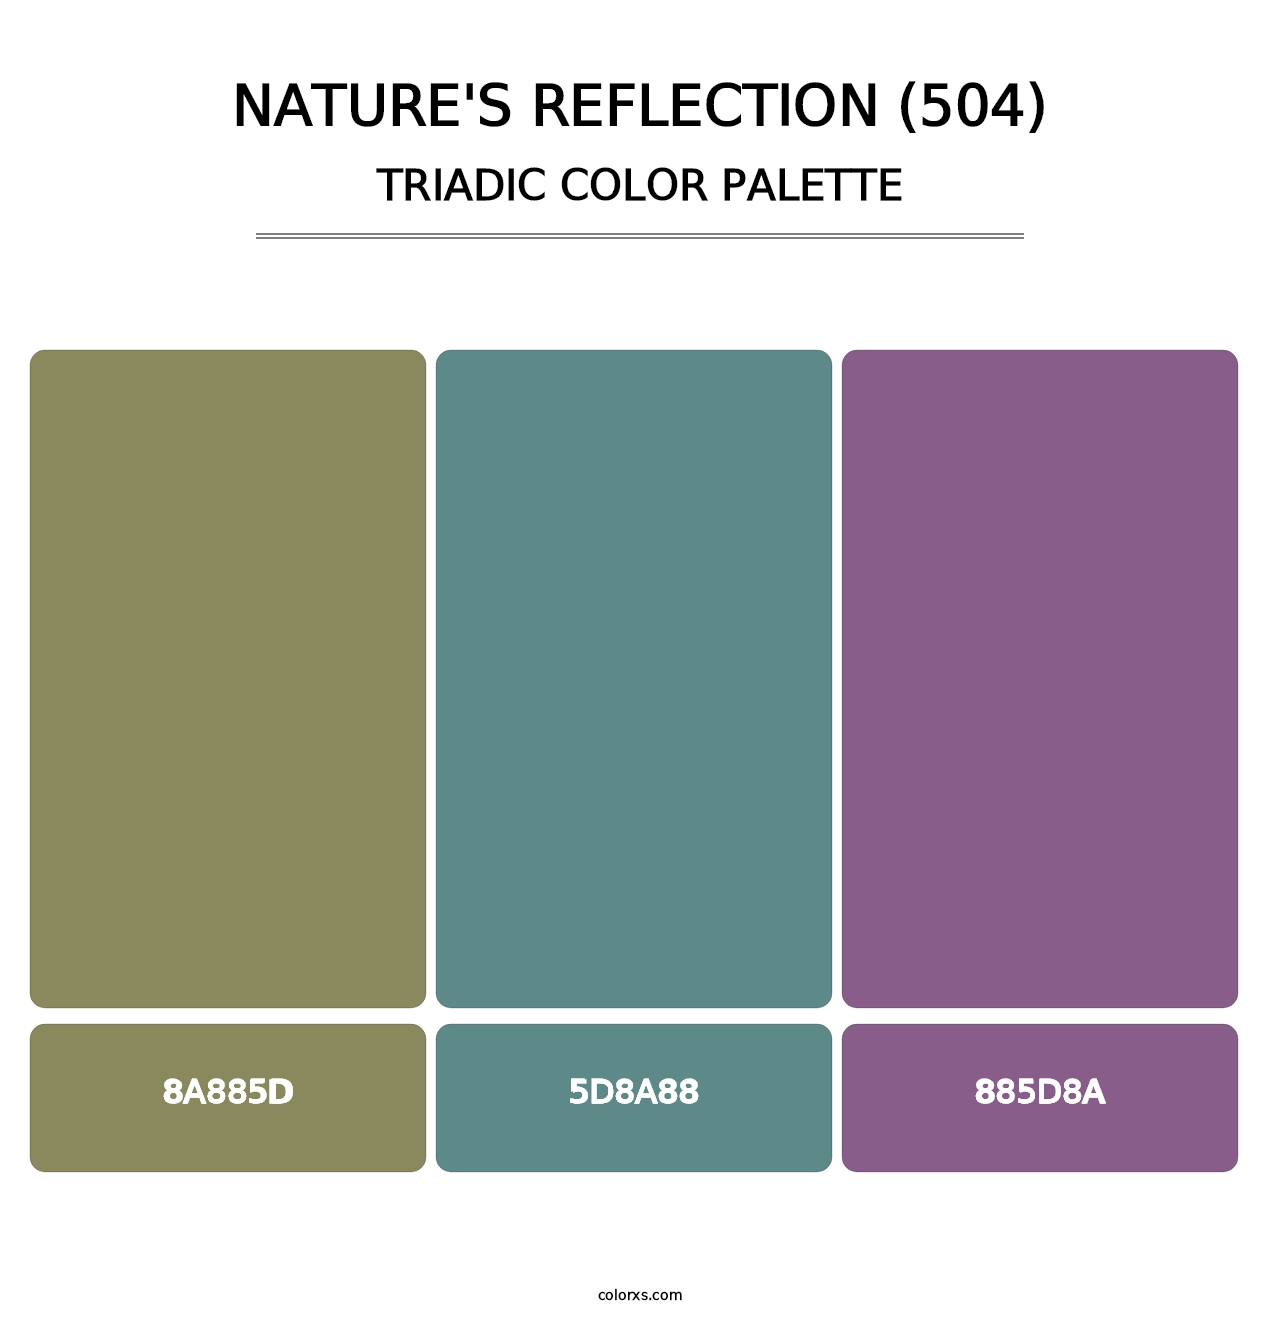 Nature's Reflection (504) - Triadic Color Palette